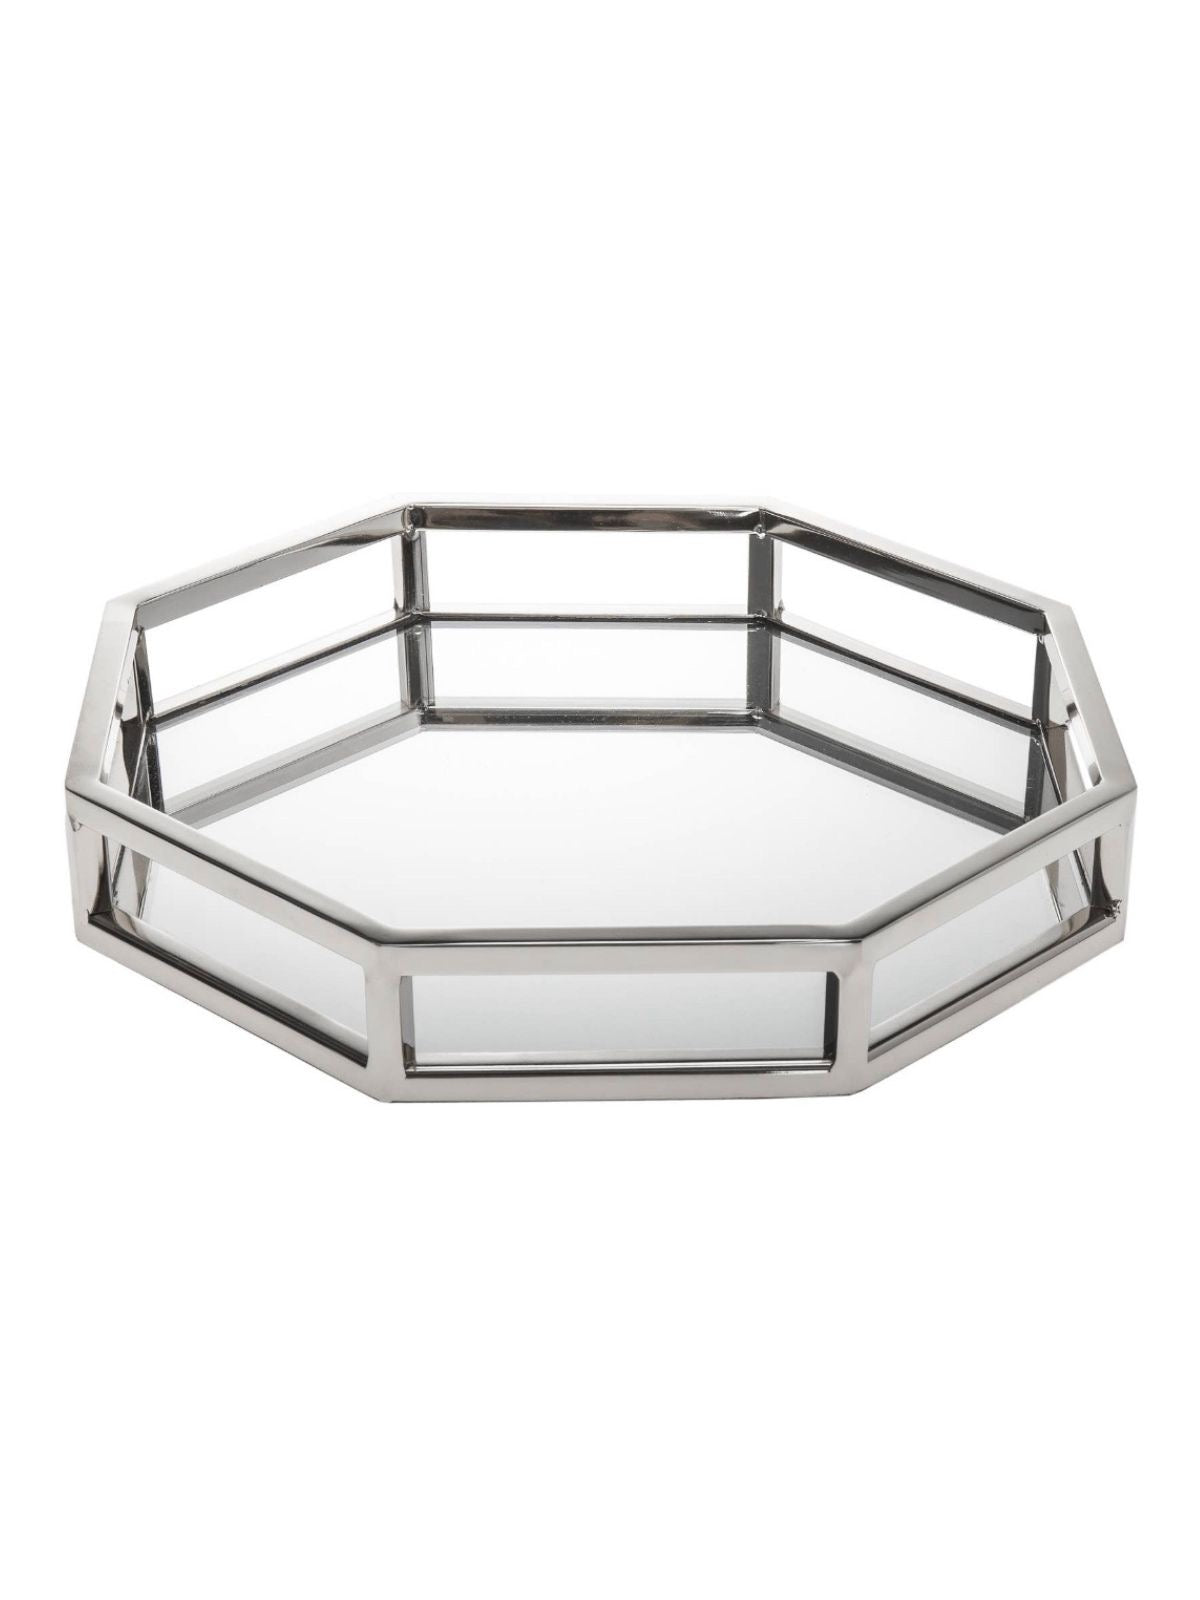 Large Silver Octagon Design Mirrored Decorative Tray for Vanities. 